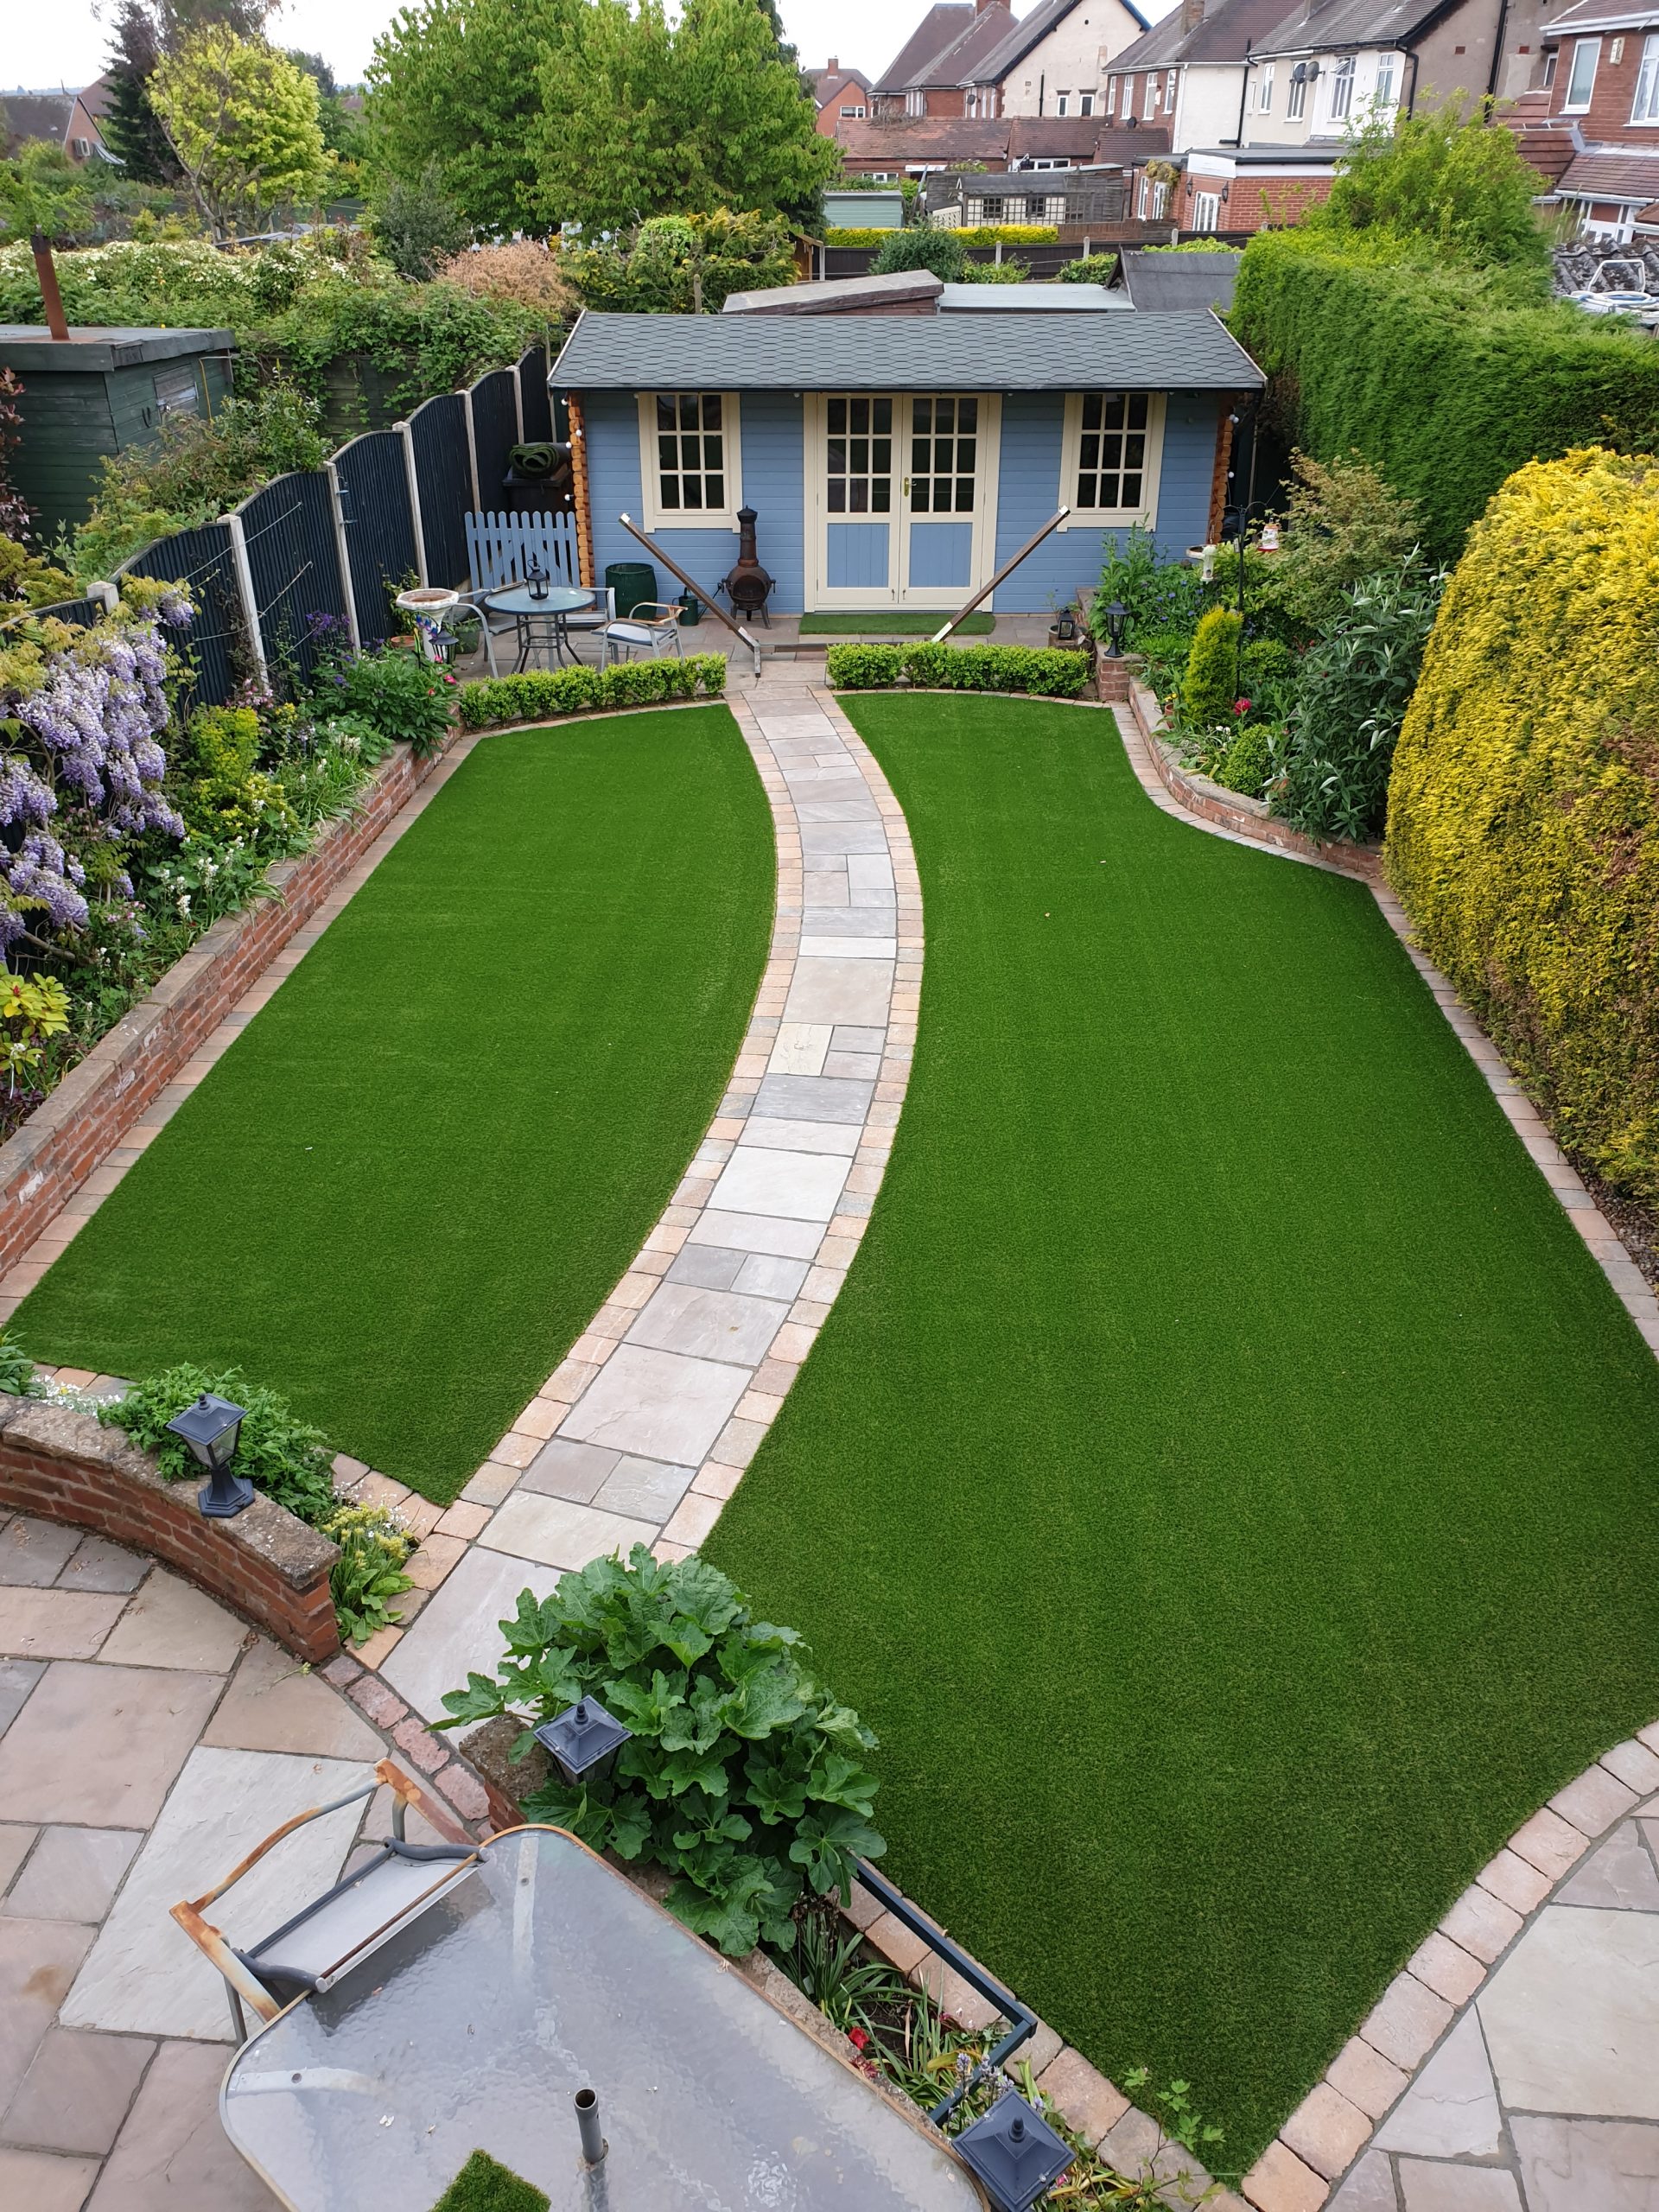 Don’t reap what you sow: Invest in good quality artificial grass @Perma_Lawn